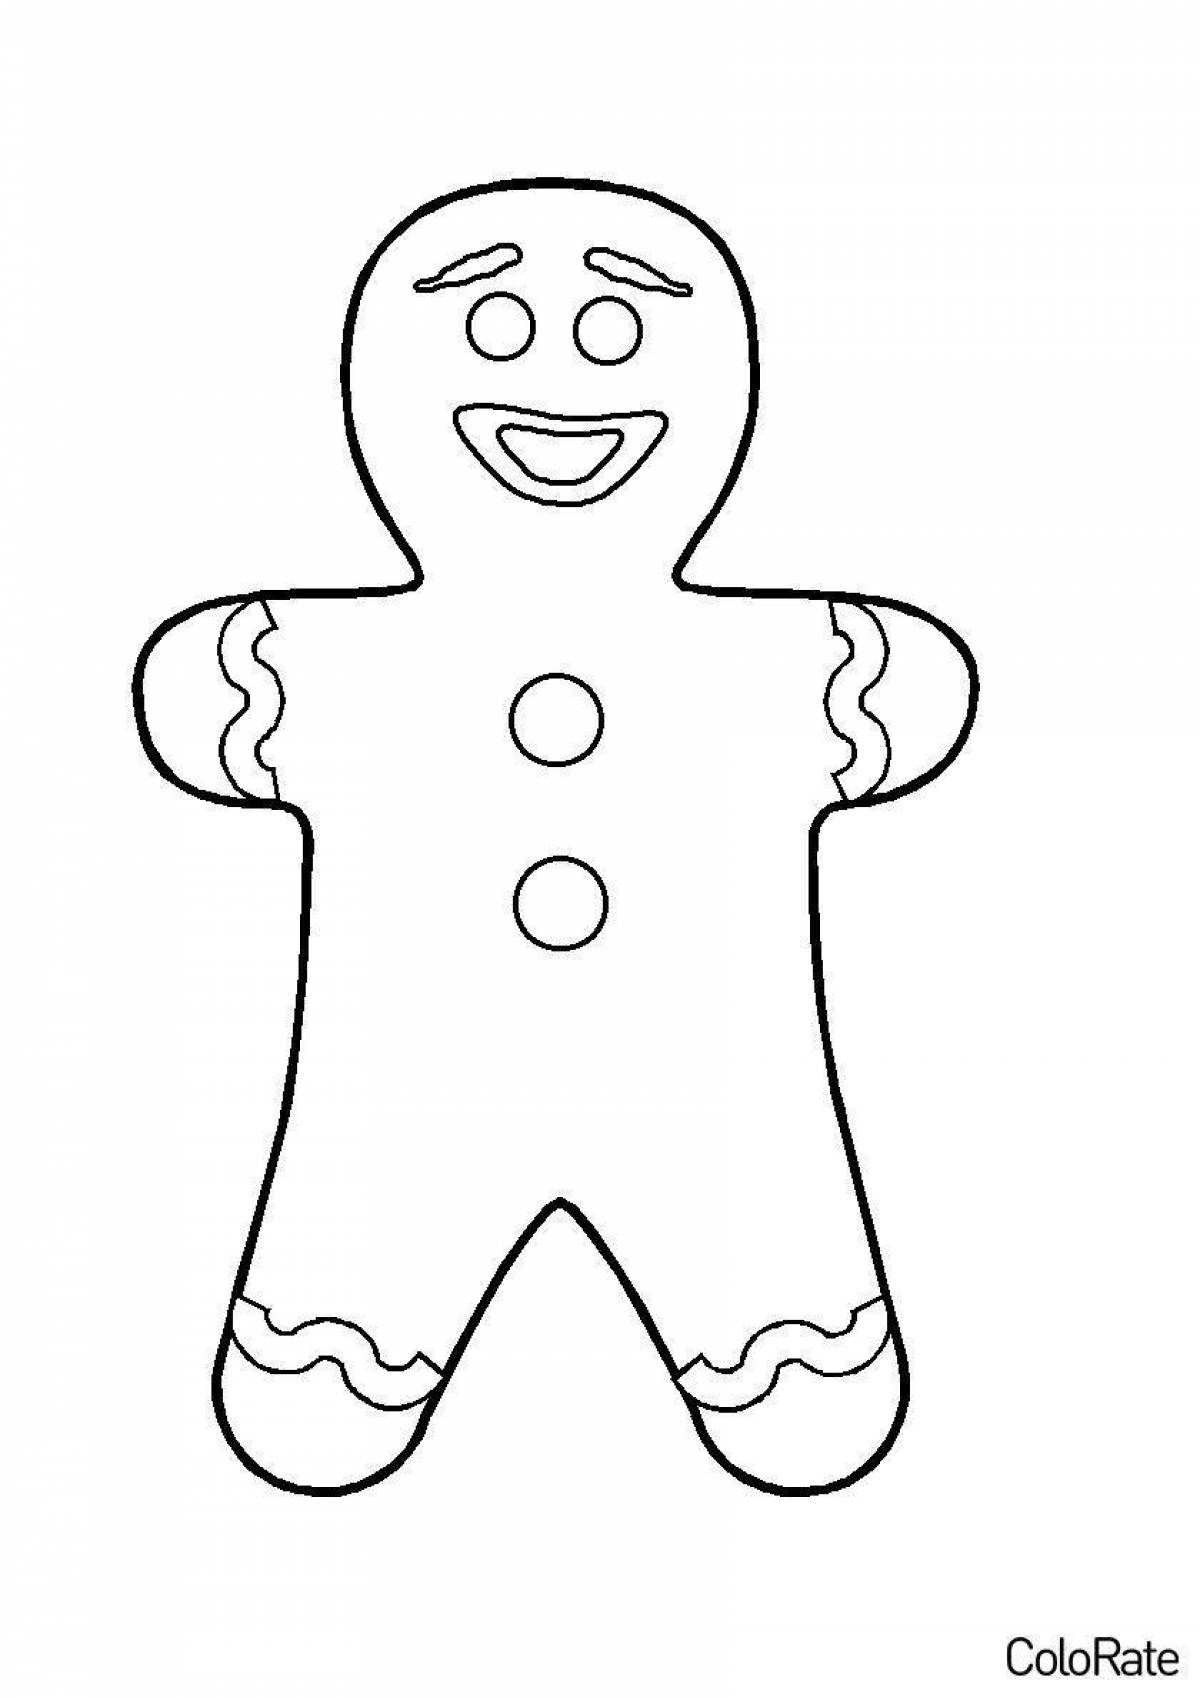 Exquisite shrek cookie coloring page